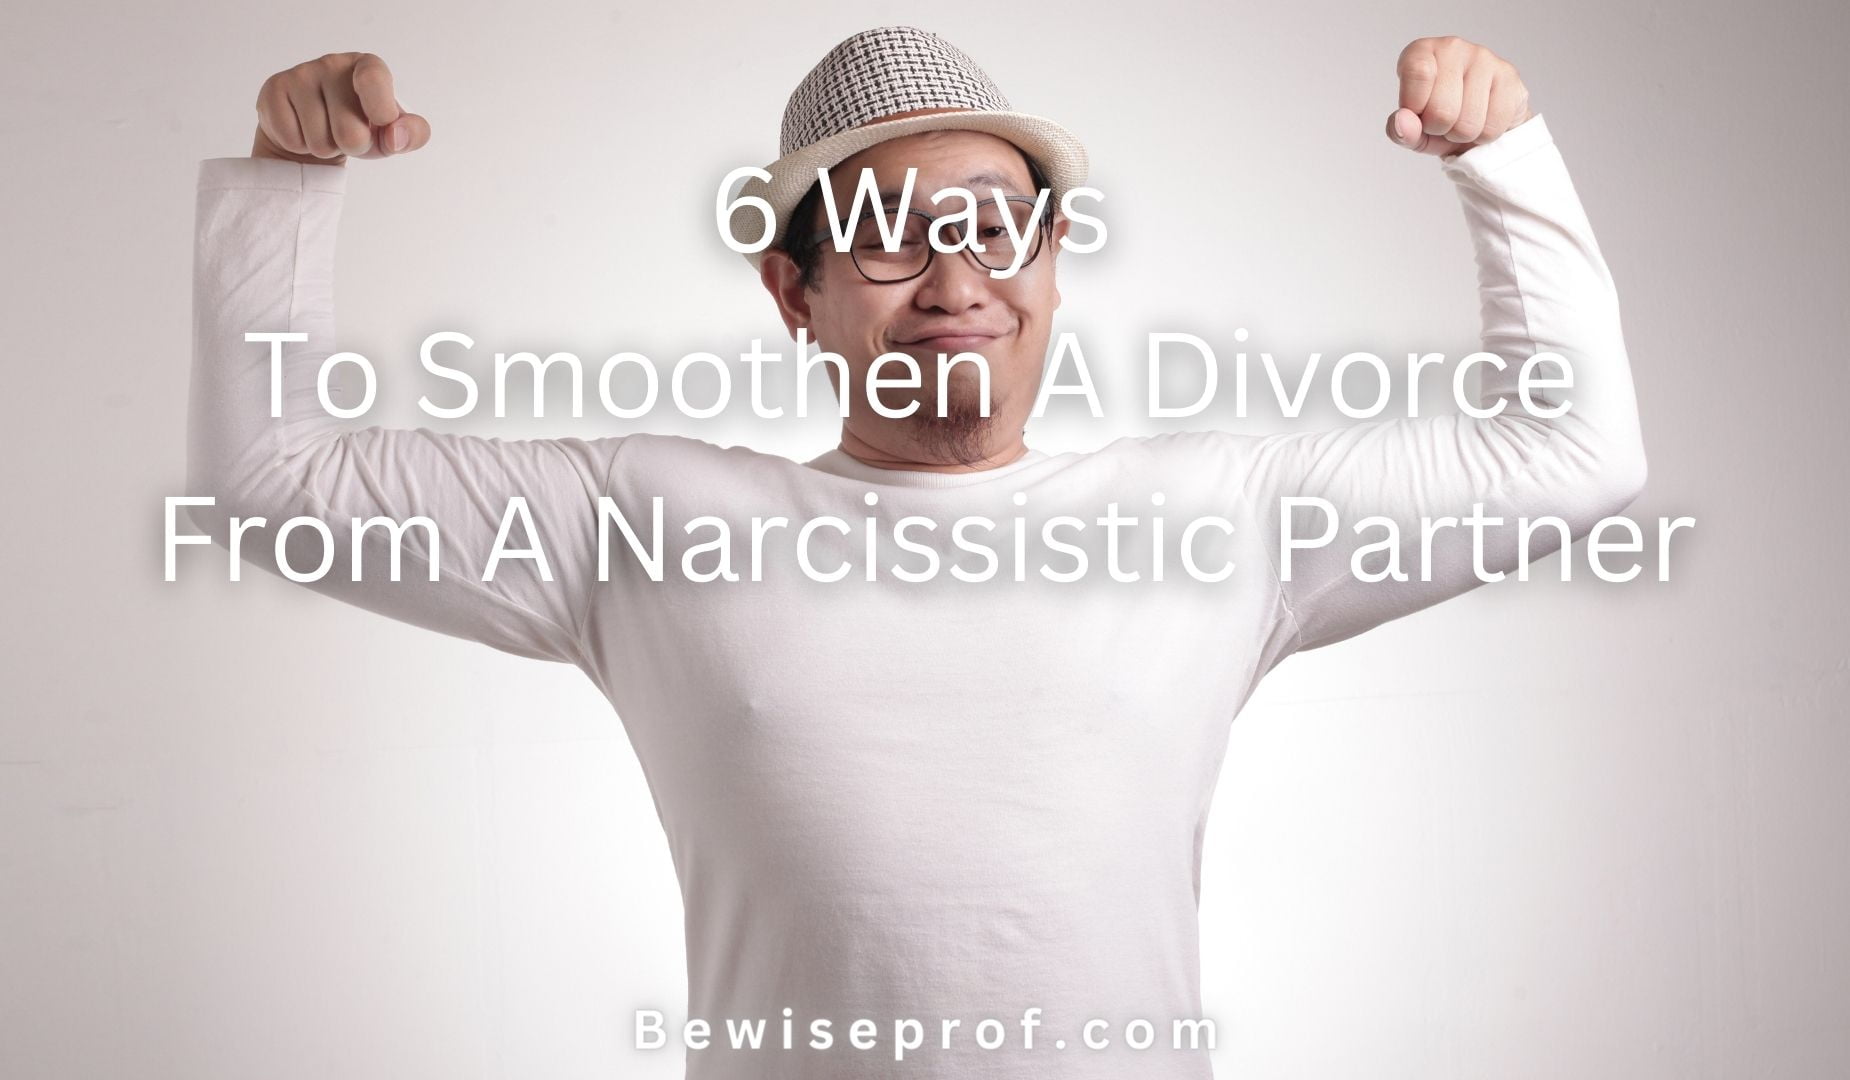 6 Ways To Smoothen A Divorce From A Narcissistic Partner